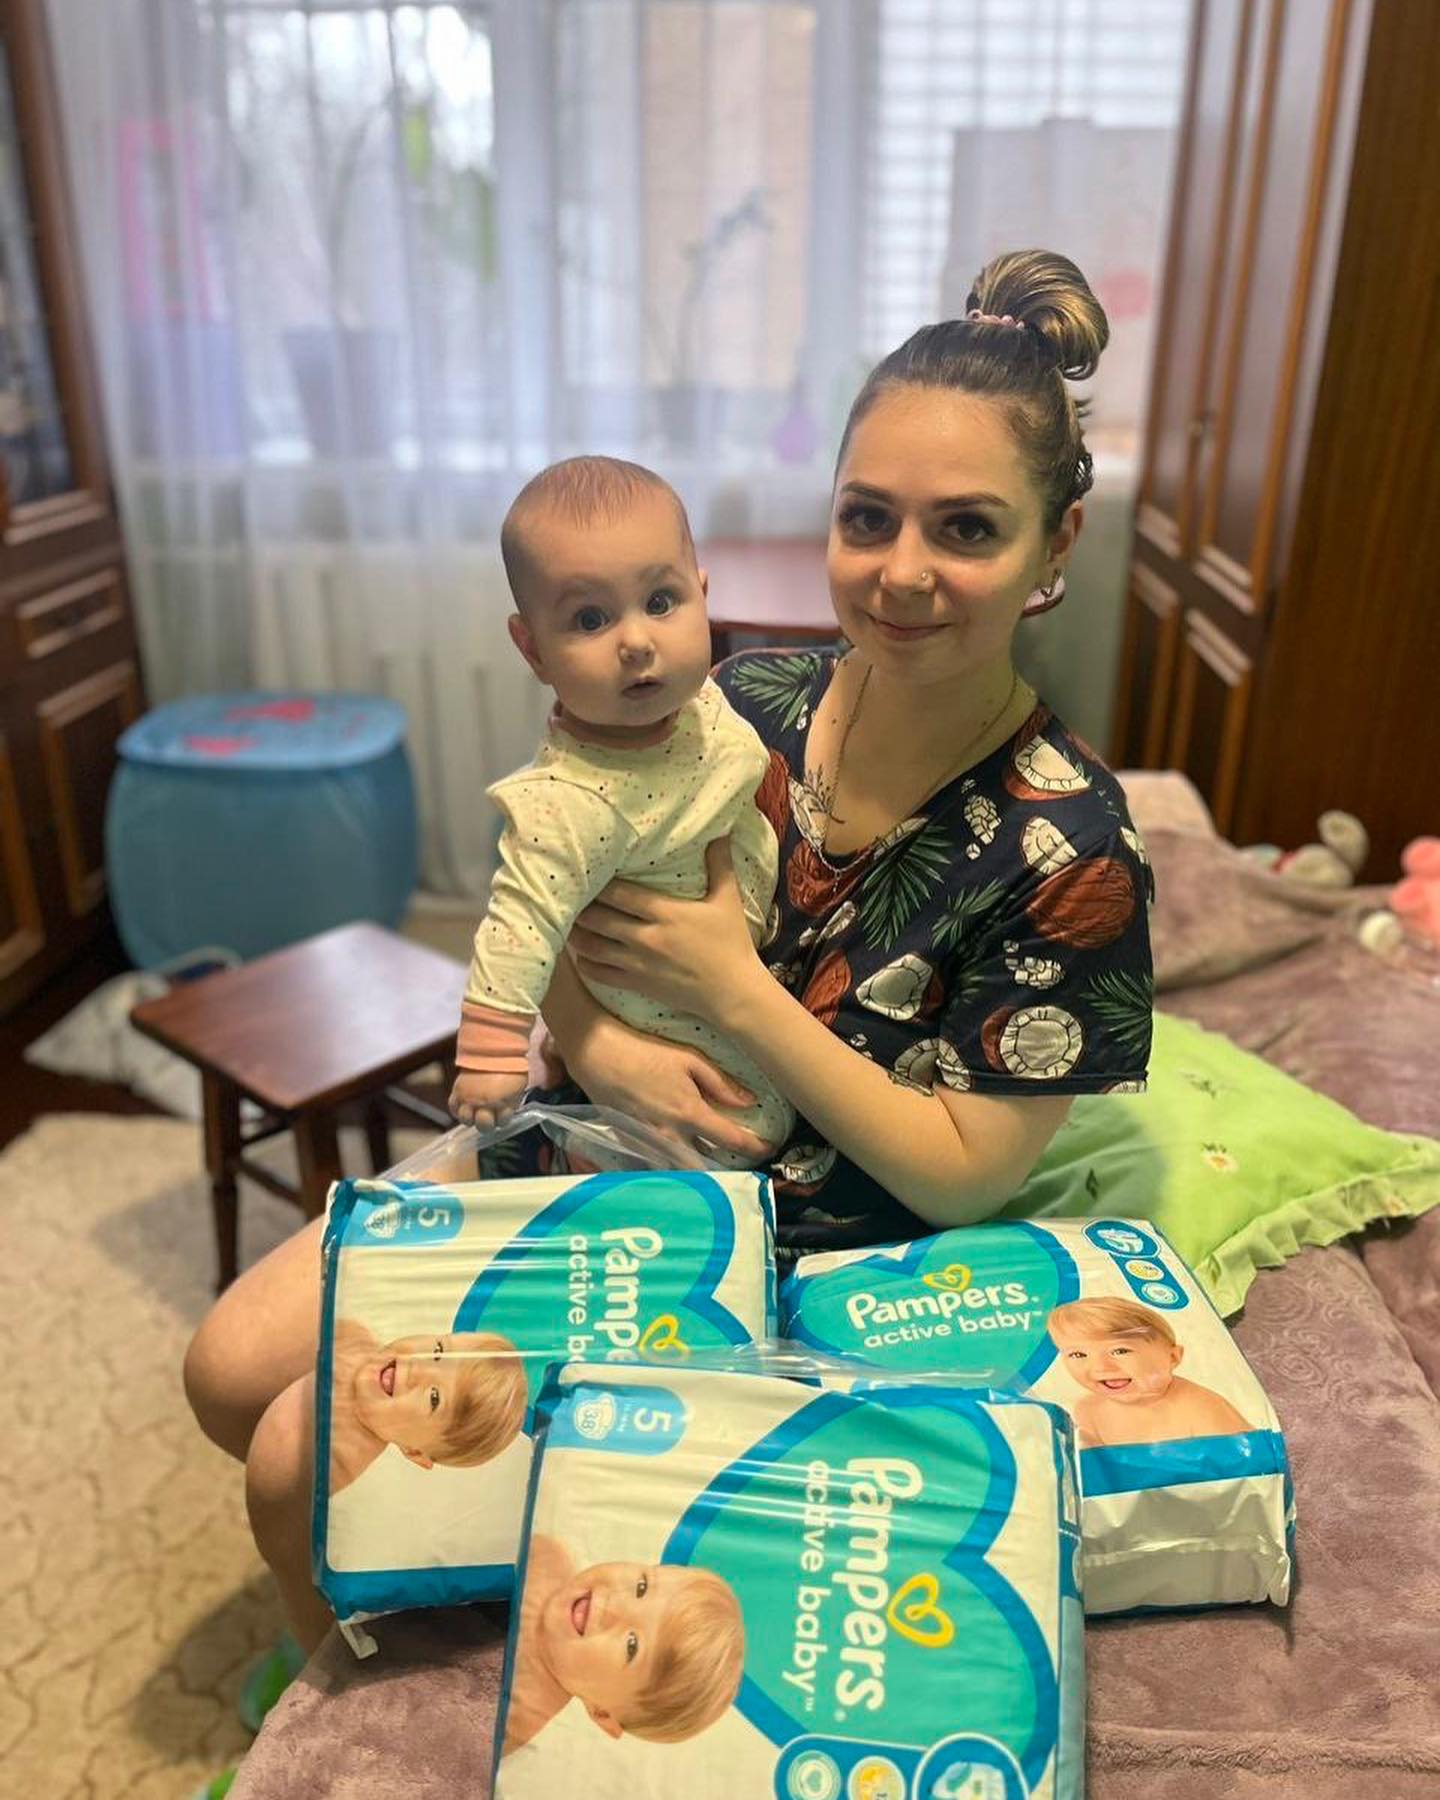 A woman with a baby sitting on a bed with packs of pampers diapers.